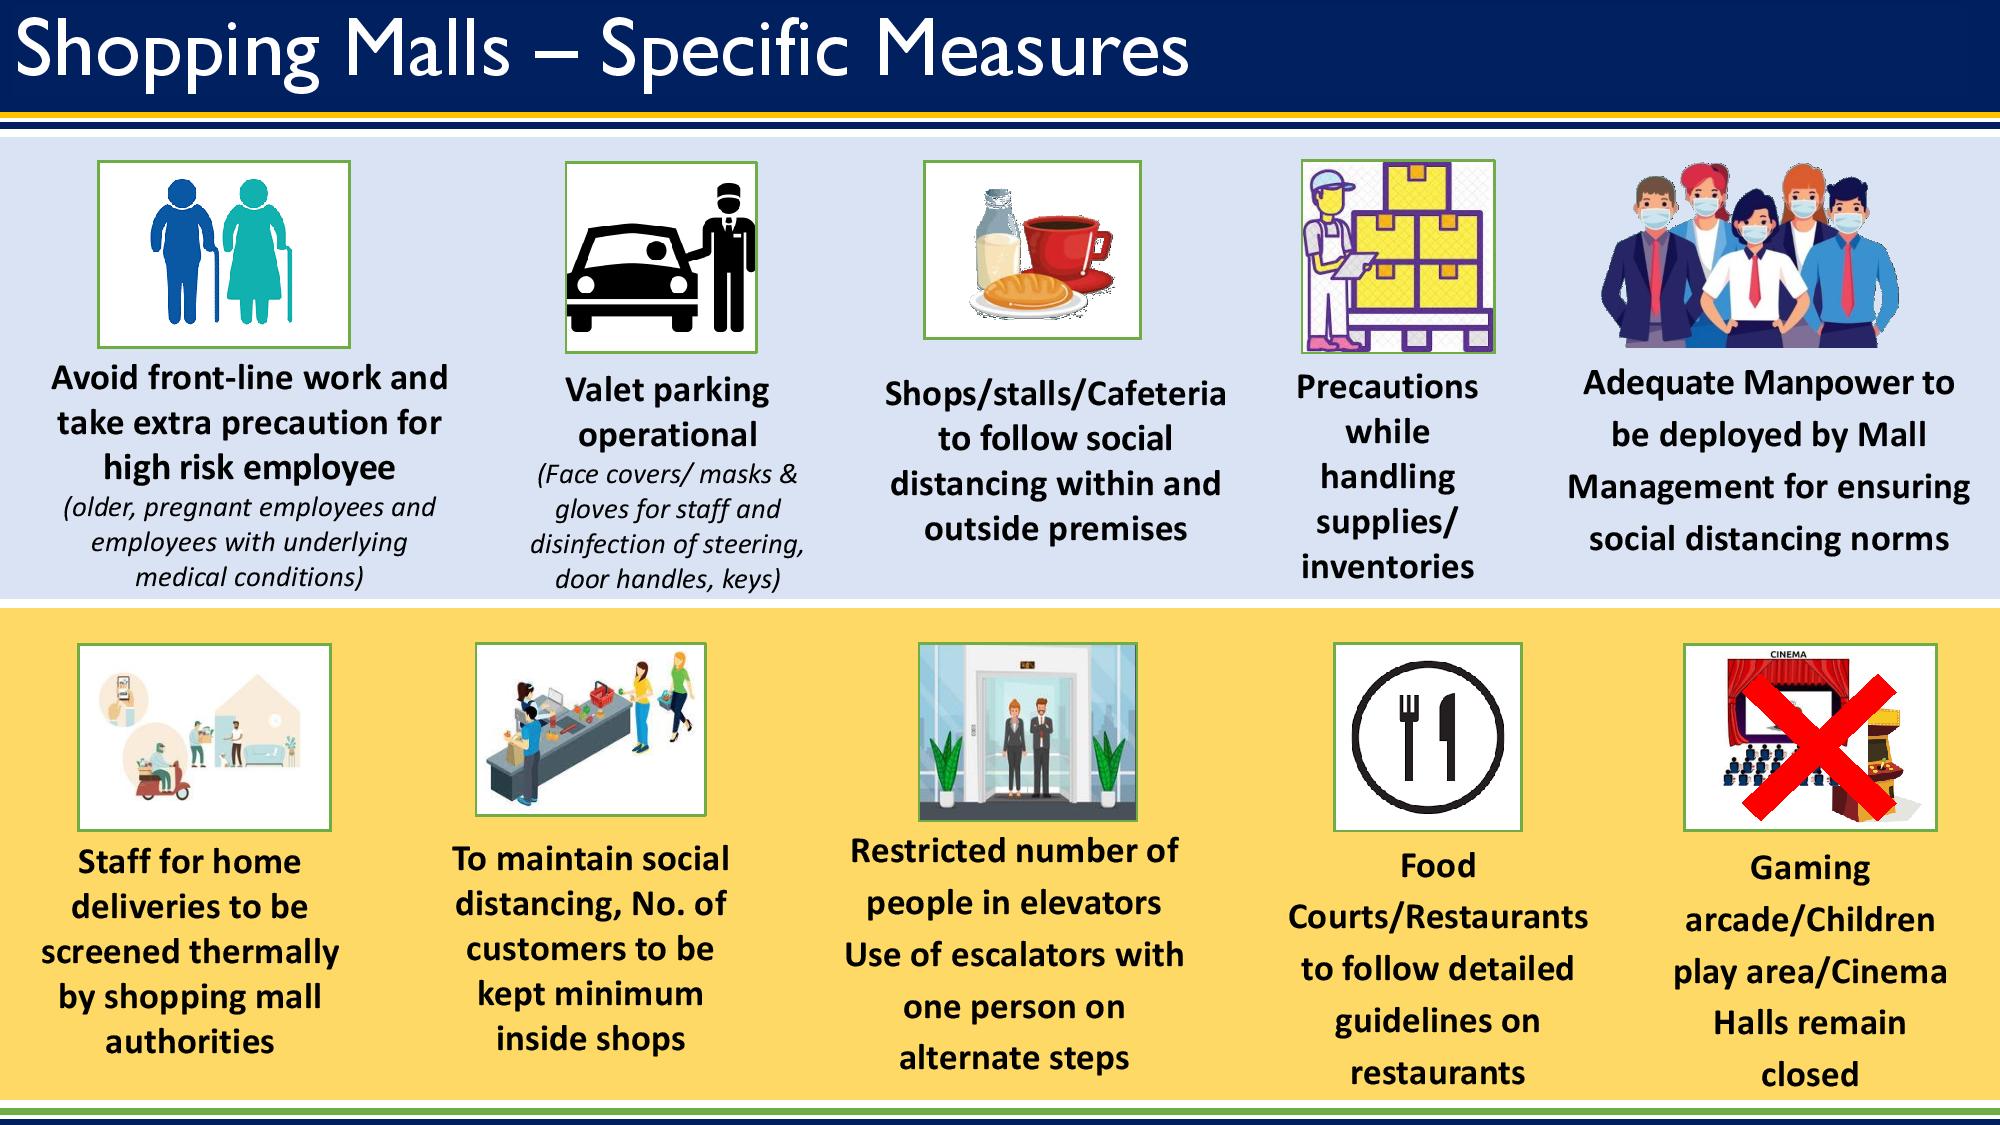 Know the guidelines to be followed inside Shopping Malls